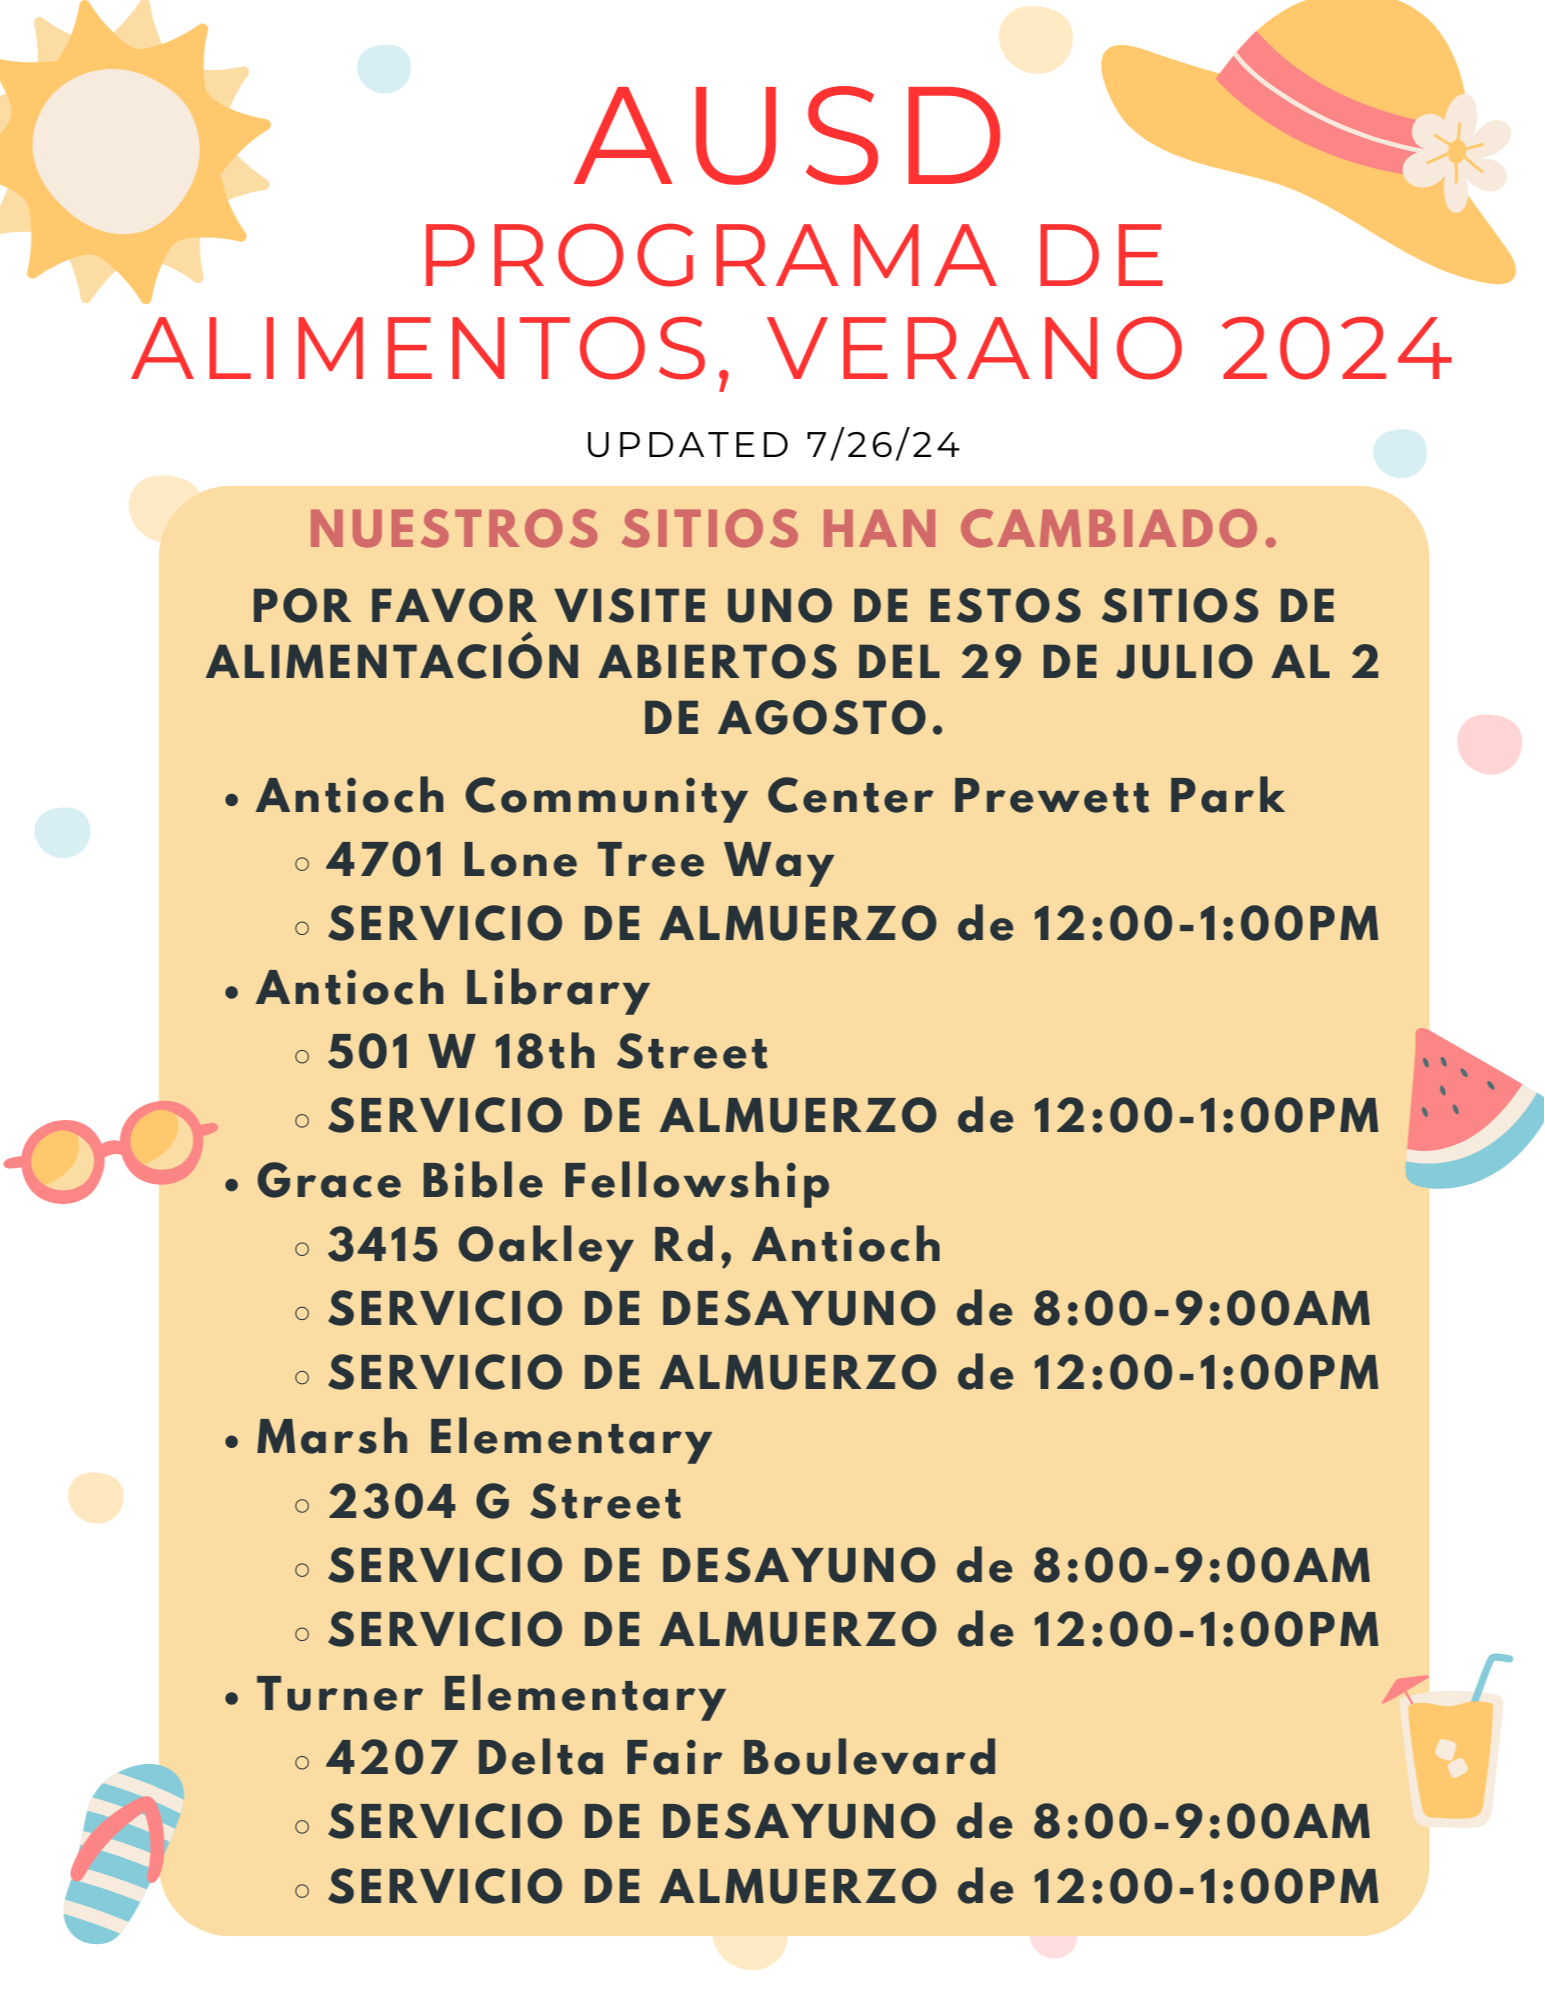 In Spanish, list of remaining open summer feeding sites starting on July 17th.